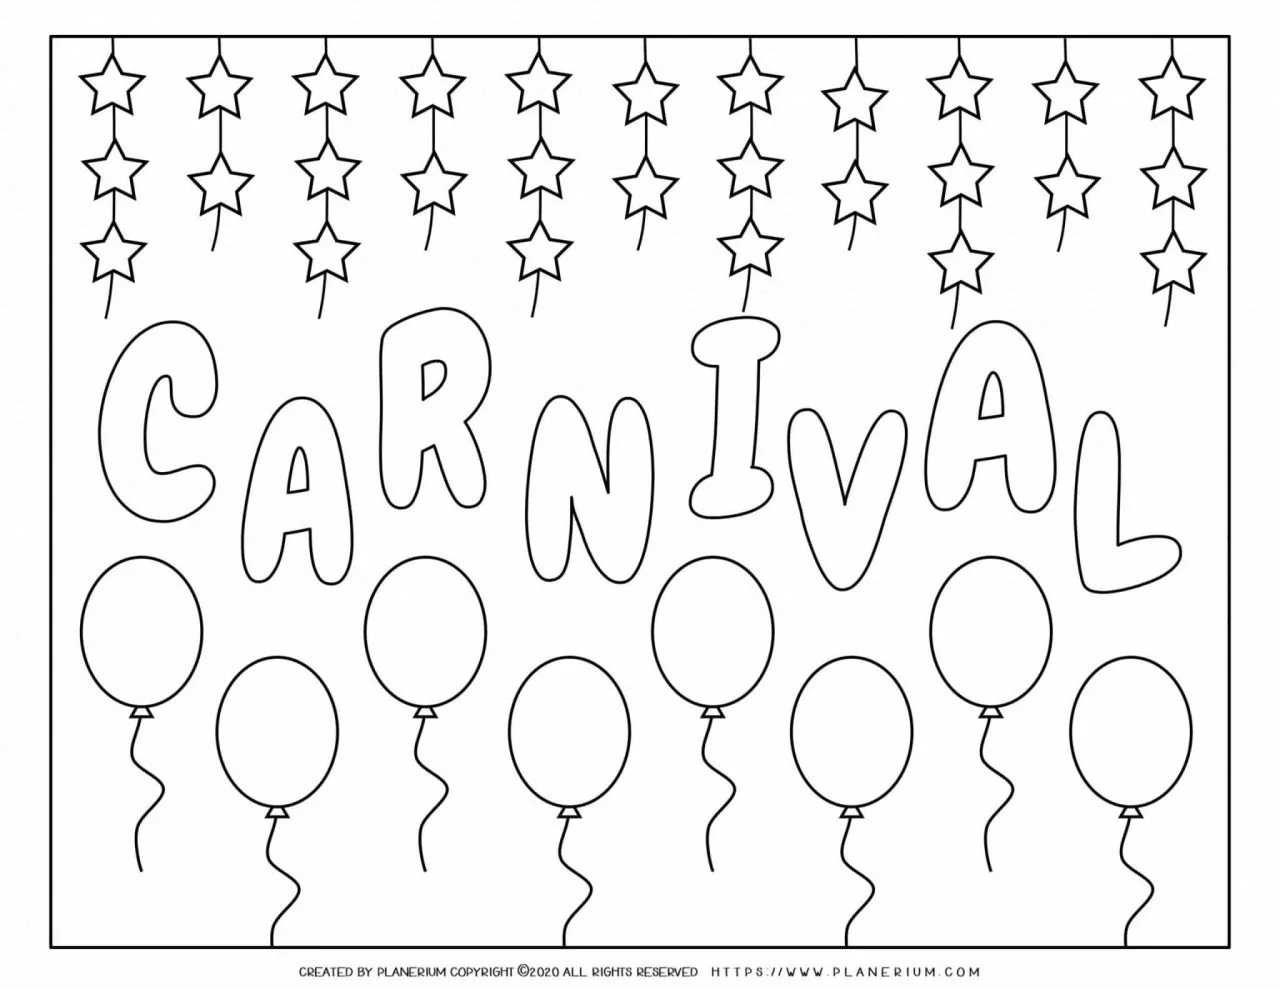 Carnival - Coloring Page Worksheet - Carnival Balloons | Planerium